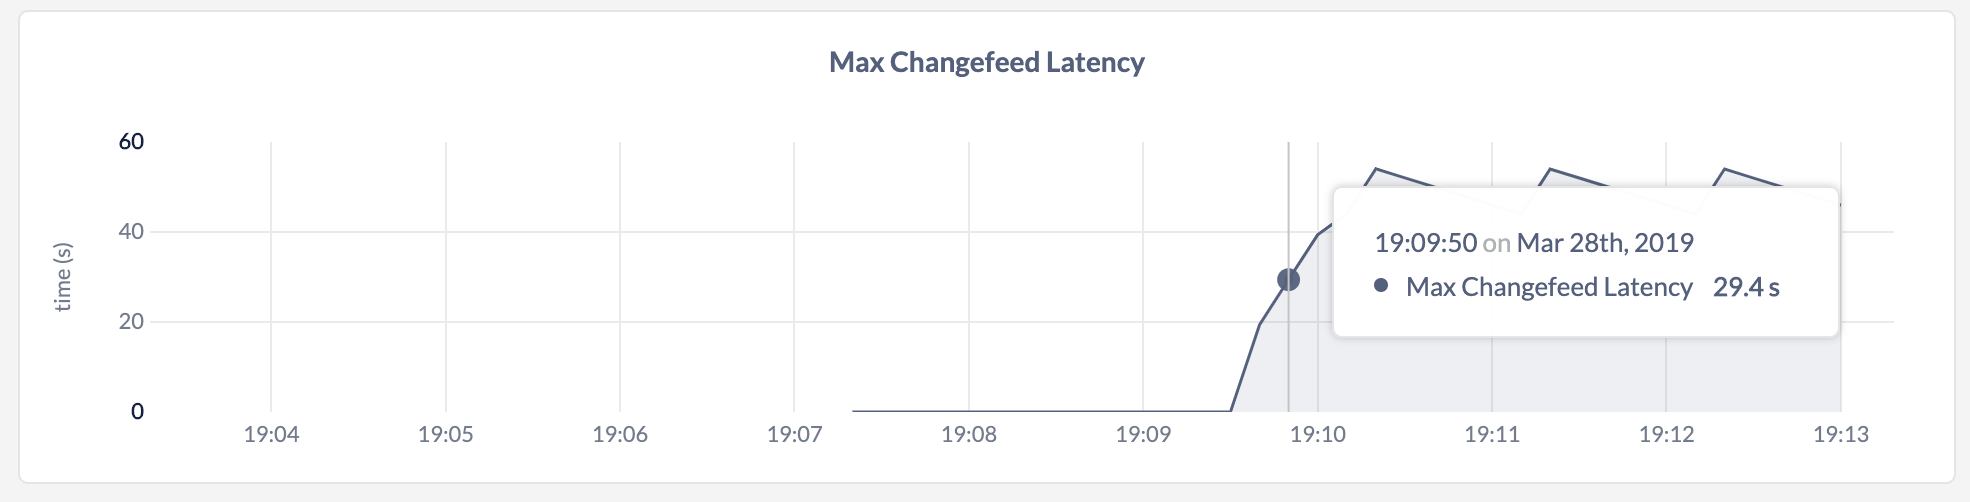 DB Console Max Changefeed Latency graph